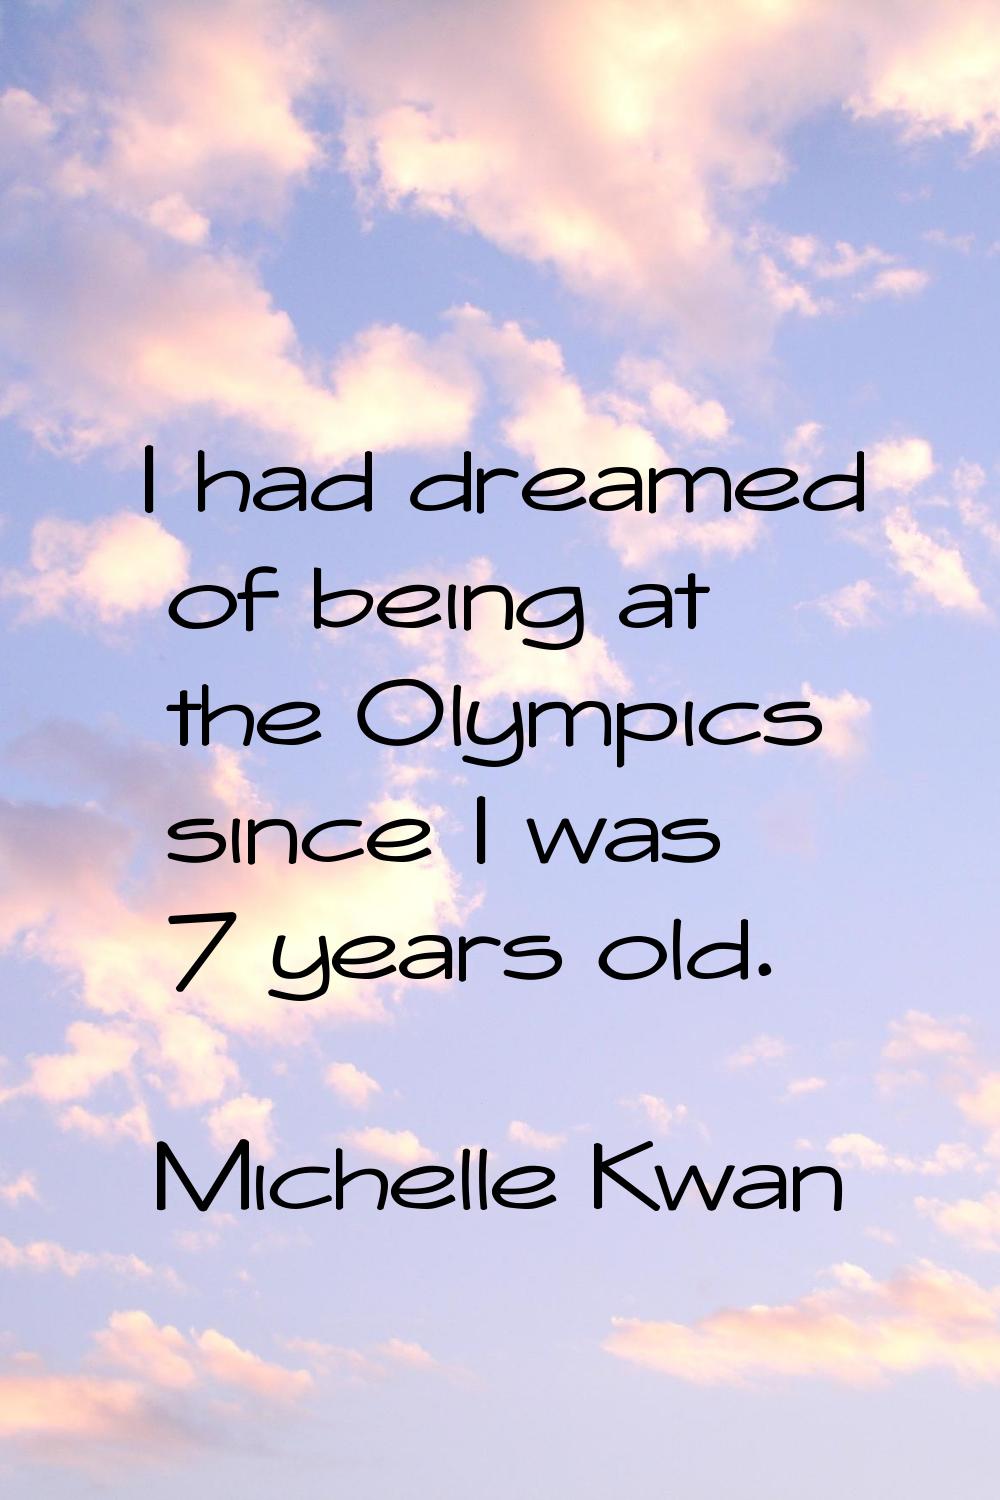 I had dreamed of being at the Olympics since I was 7 years old.